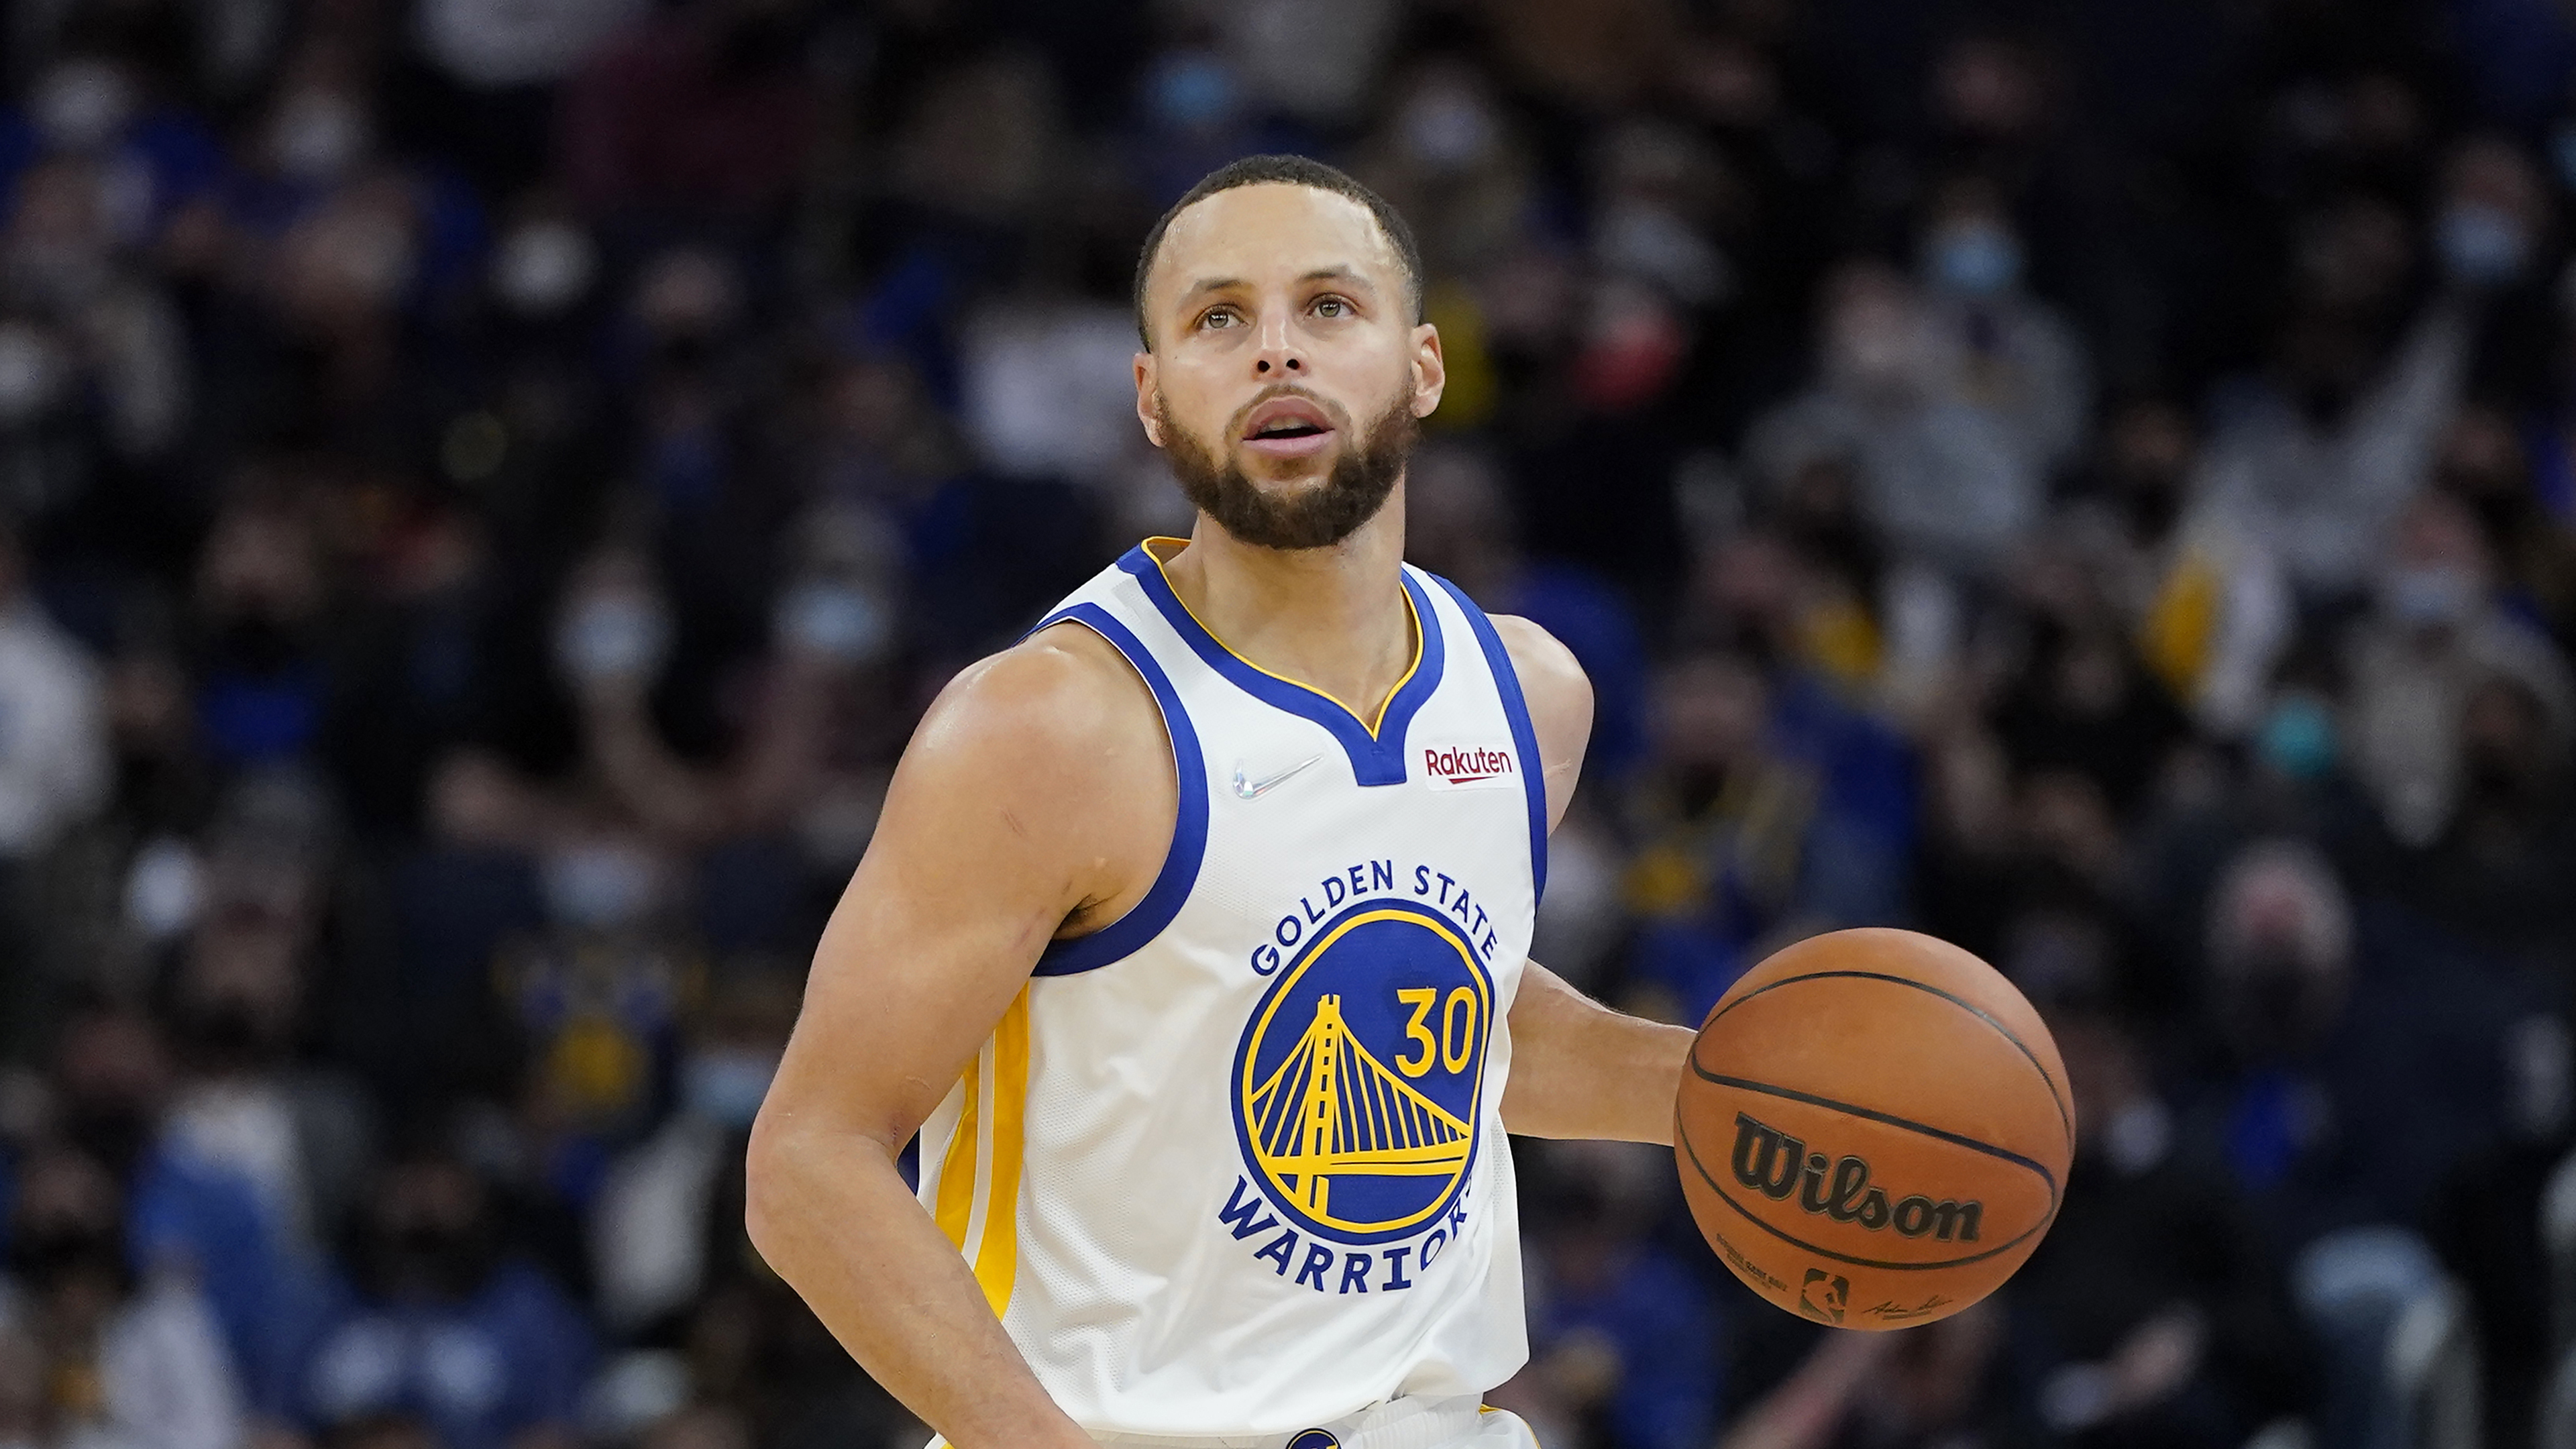 BR: Warriors podcast